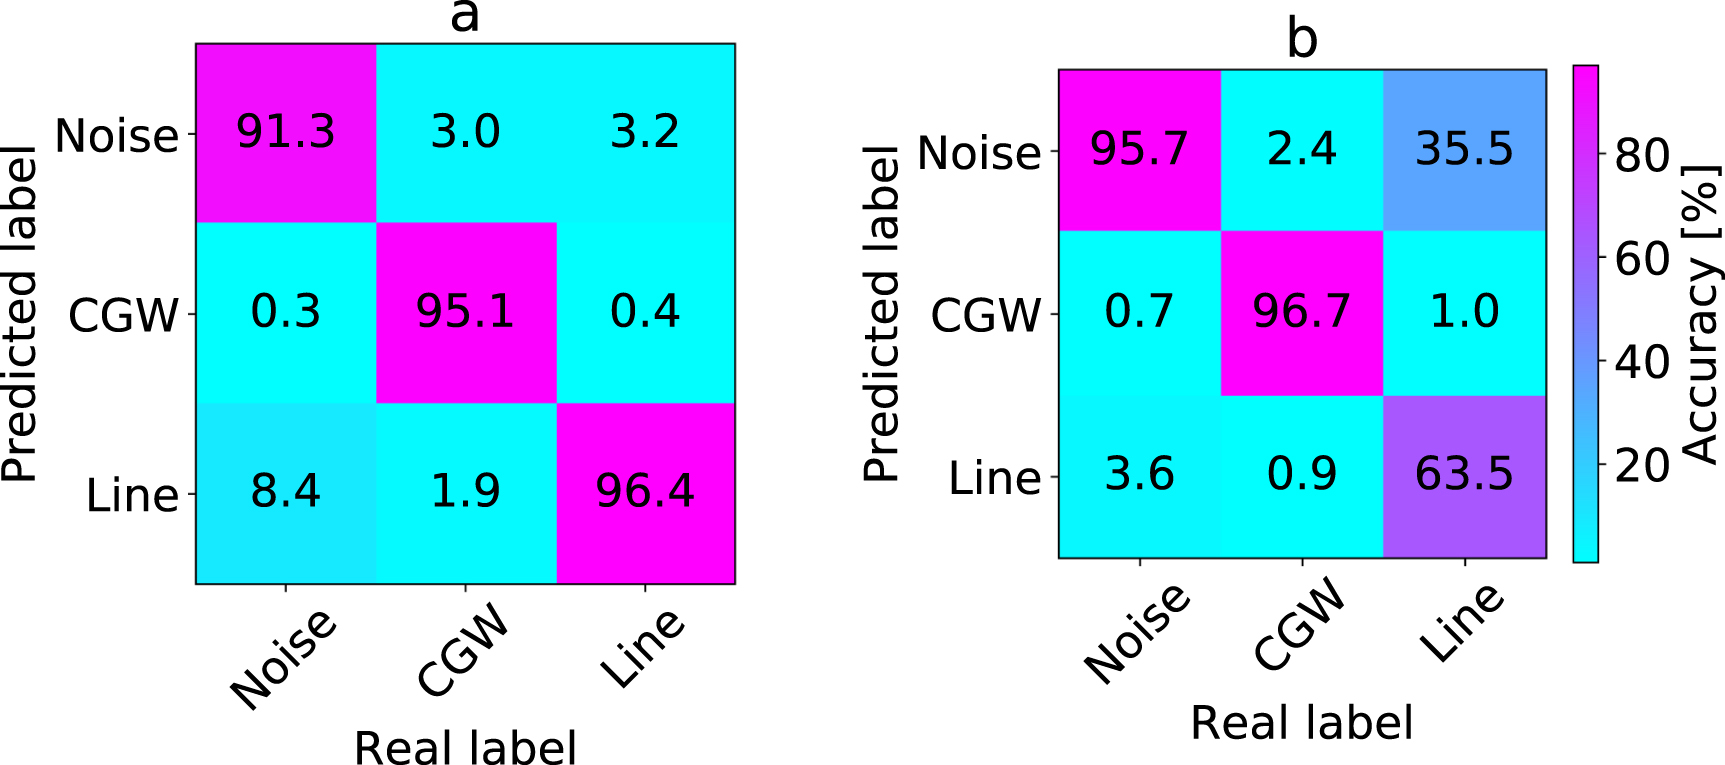 Confusion matrix for the three-label classification evaluated on the test set for the 1D CNN (a) and 2D CNN (b) after the training. Although the <b>cgw</b> and the <b>noise</b> were classified on a similar level, the <b>line</b> caused significant problem for the 2D model. The majority of <b>line</b> instances resembled <b>noise</b> class in the image representation.